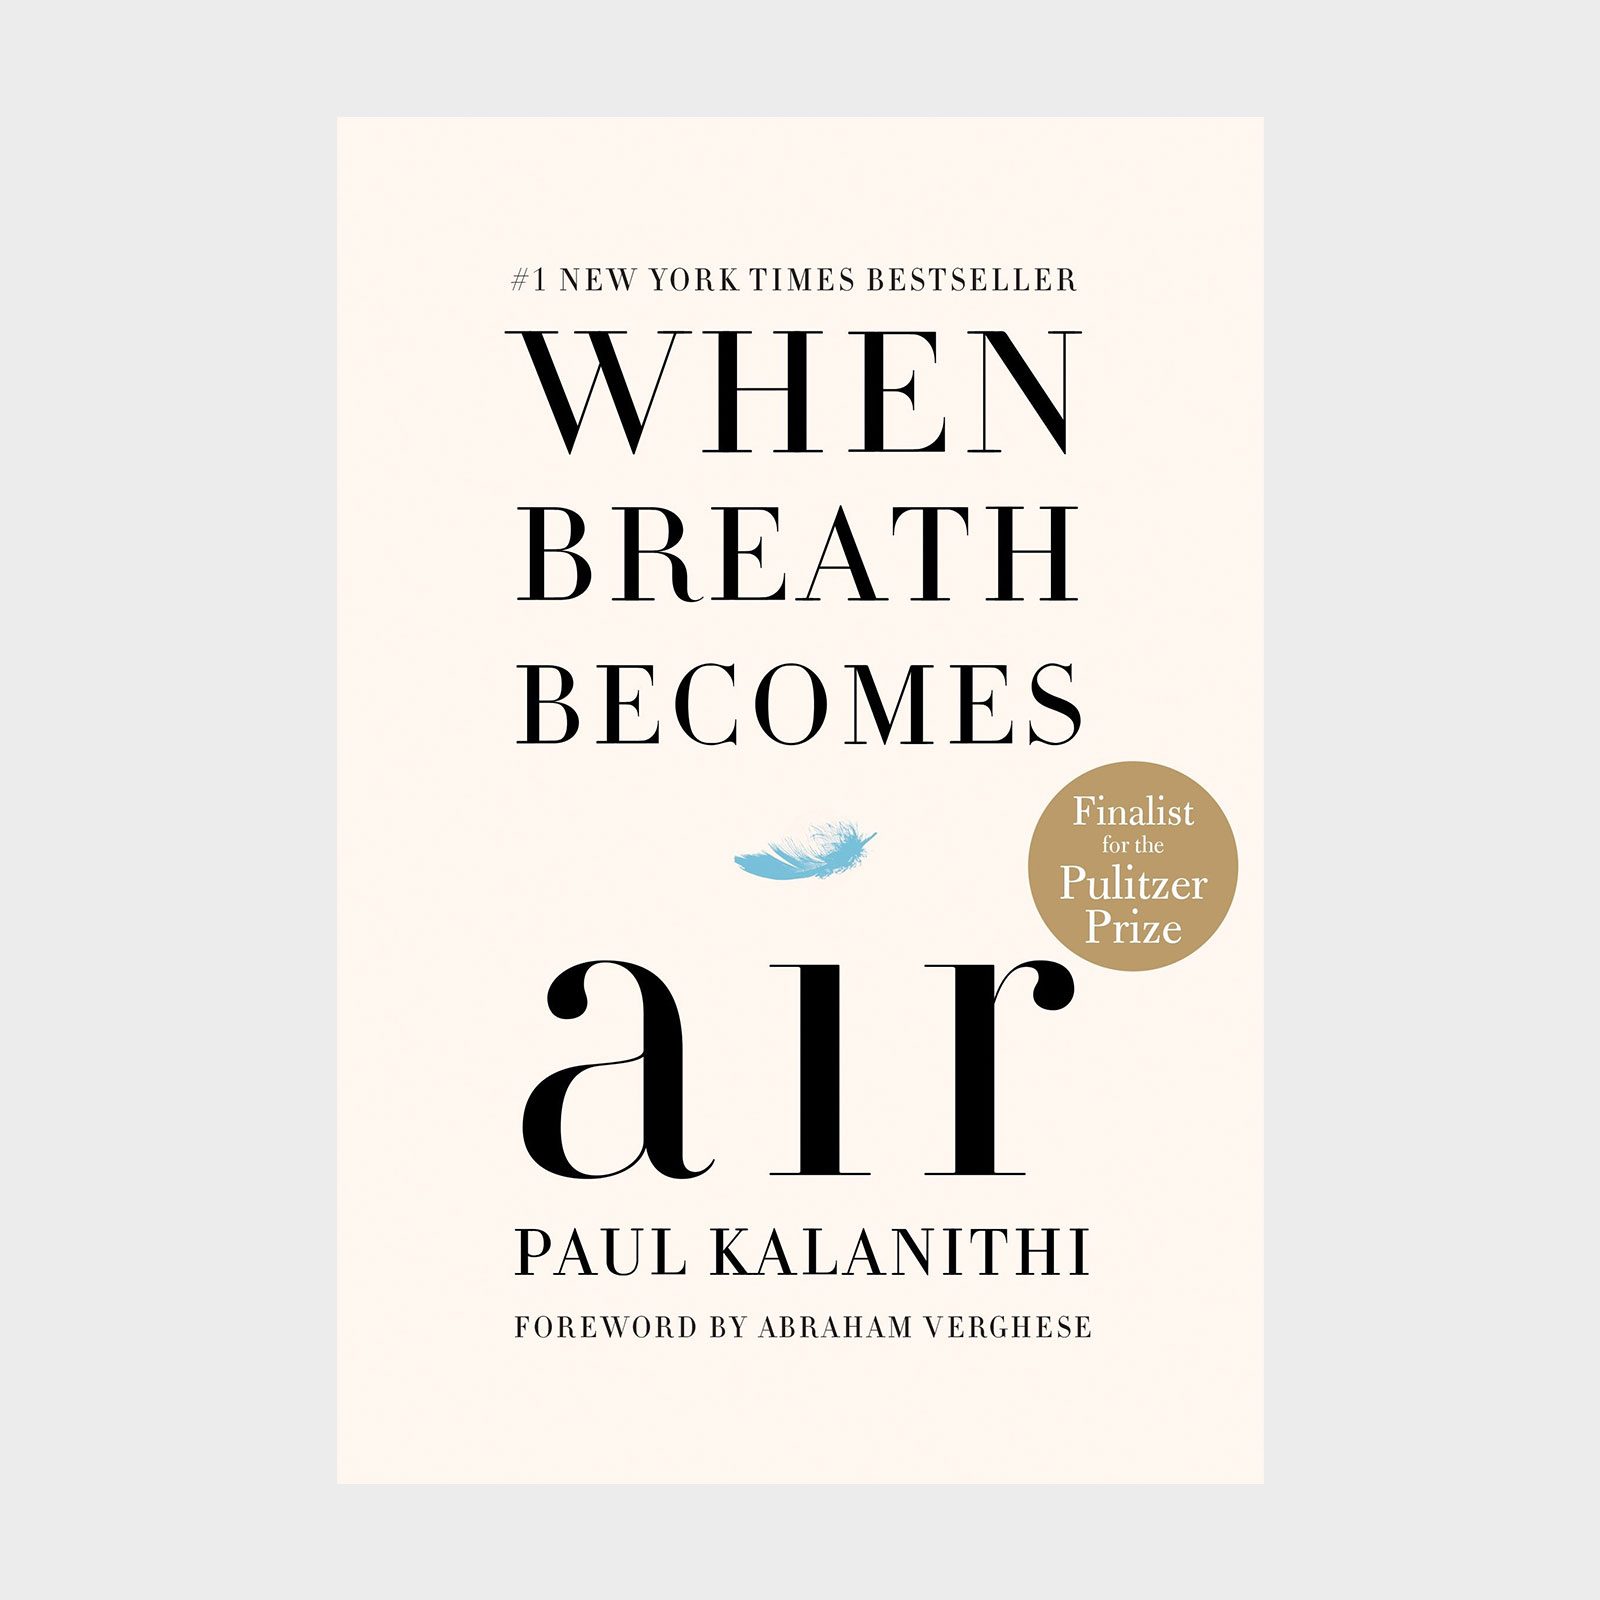 <p>What makes a virtuous and meaningful life? That's the question neurosurgeon Paul Kalanithi sought to answer after receiving his stage IV lung cancer diagnosis at age 36. Just a decade into his young career, Kalanithi was forced to confront his own mortality and began writing this memorable, devastating and inspiring memoir. Kalanithi died in 2015, before <a href="https://www.amazon.com/When-Breath-Becomes-Paul-Kalanithi/dp/081298840X" rel="noopener"><em>When Breath Becomes Air</em></a> was published, but not before he shared a transformative collection of insights and learnings in this profound read.</p> <p class="listicle-page__cta-button-shop"><a class="shop-btn" href="https://www.amazon.com/When-Breath-Becomes-Paul-Kalanithi/dp/081298840X/">Shop Now</a></p>